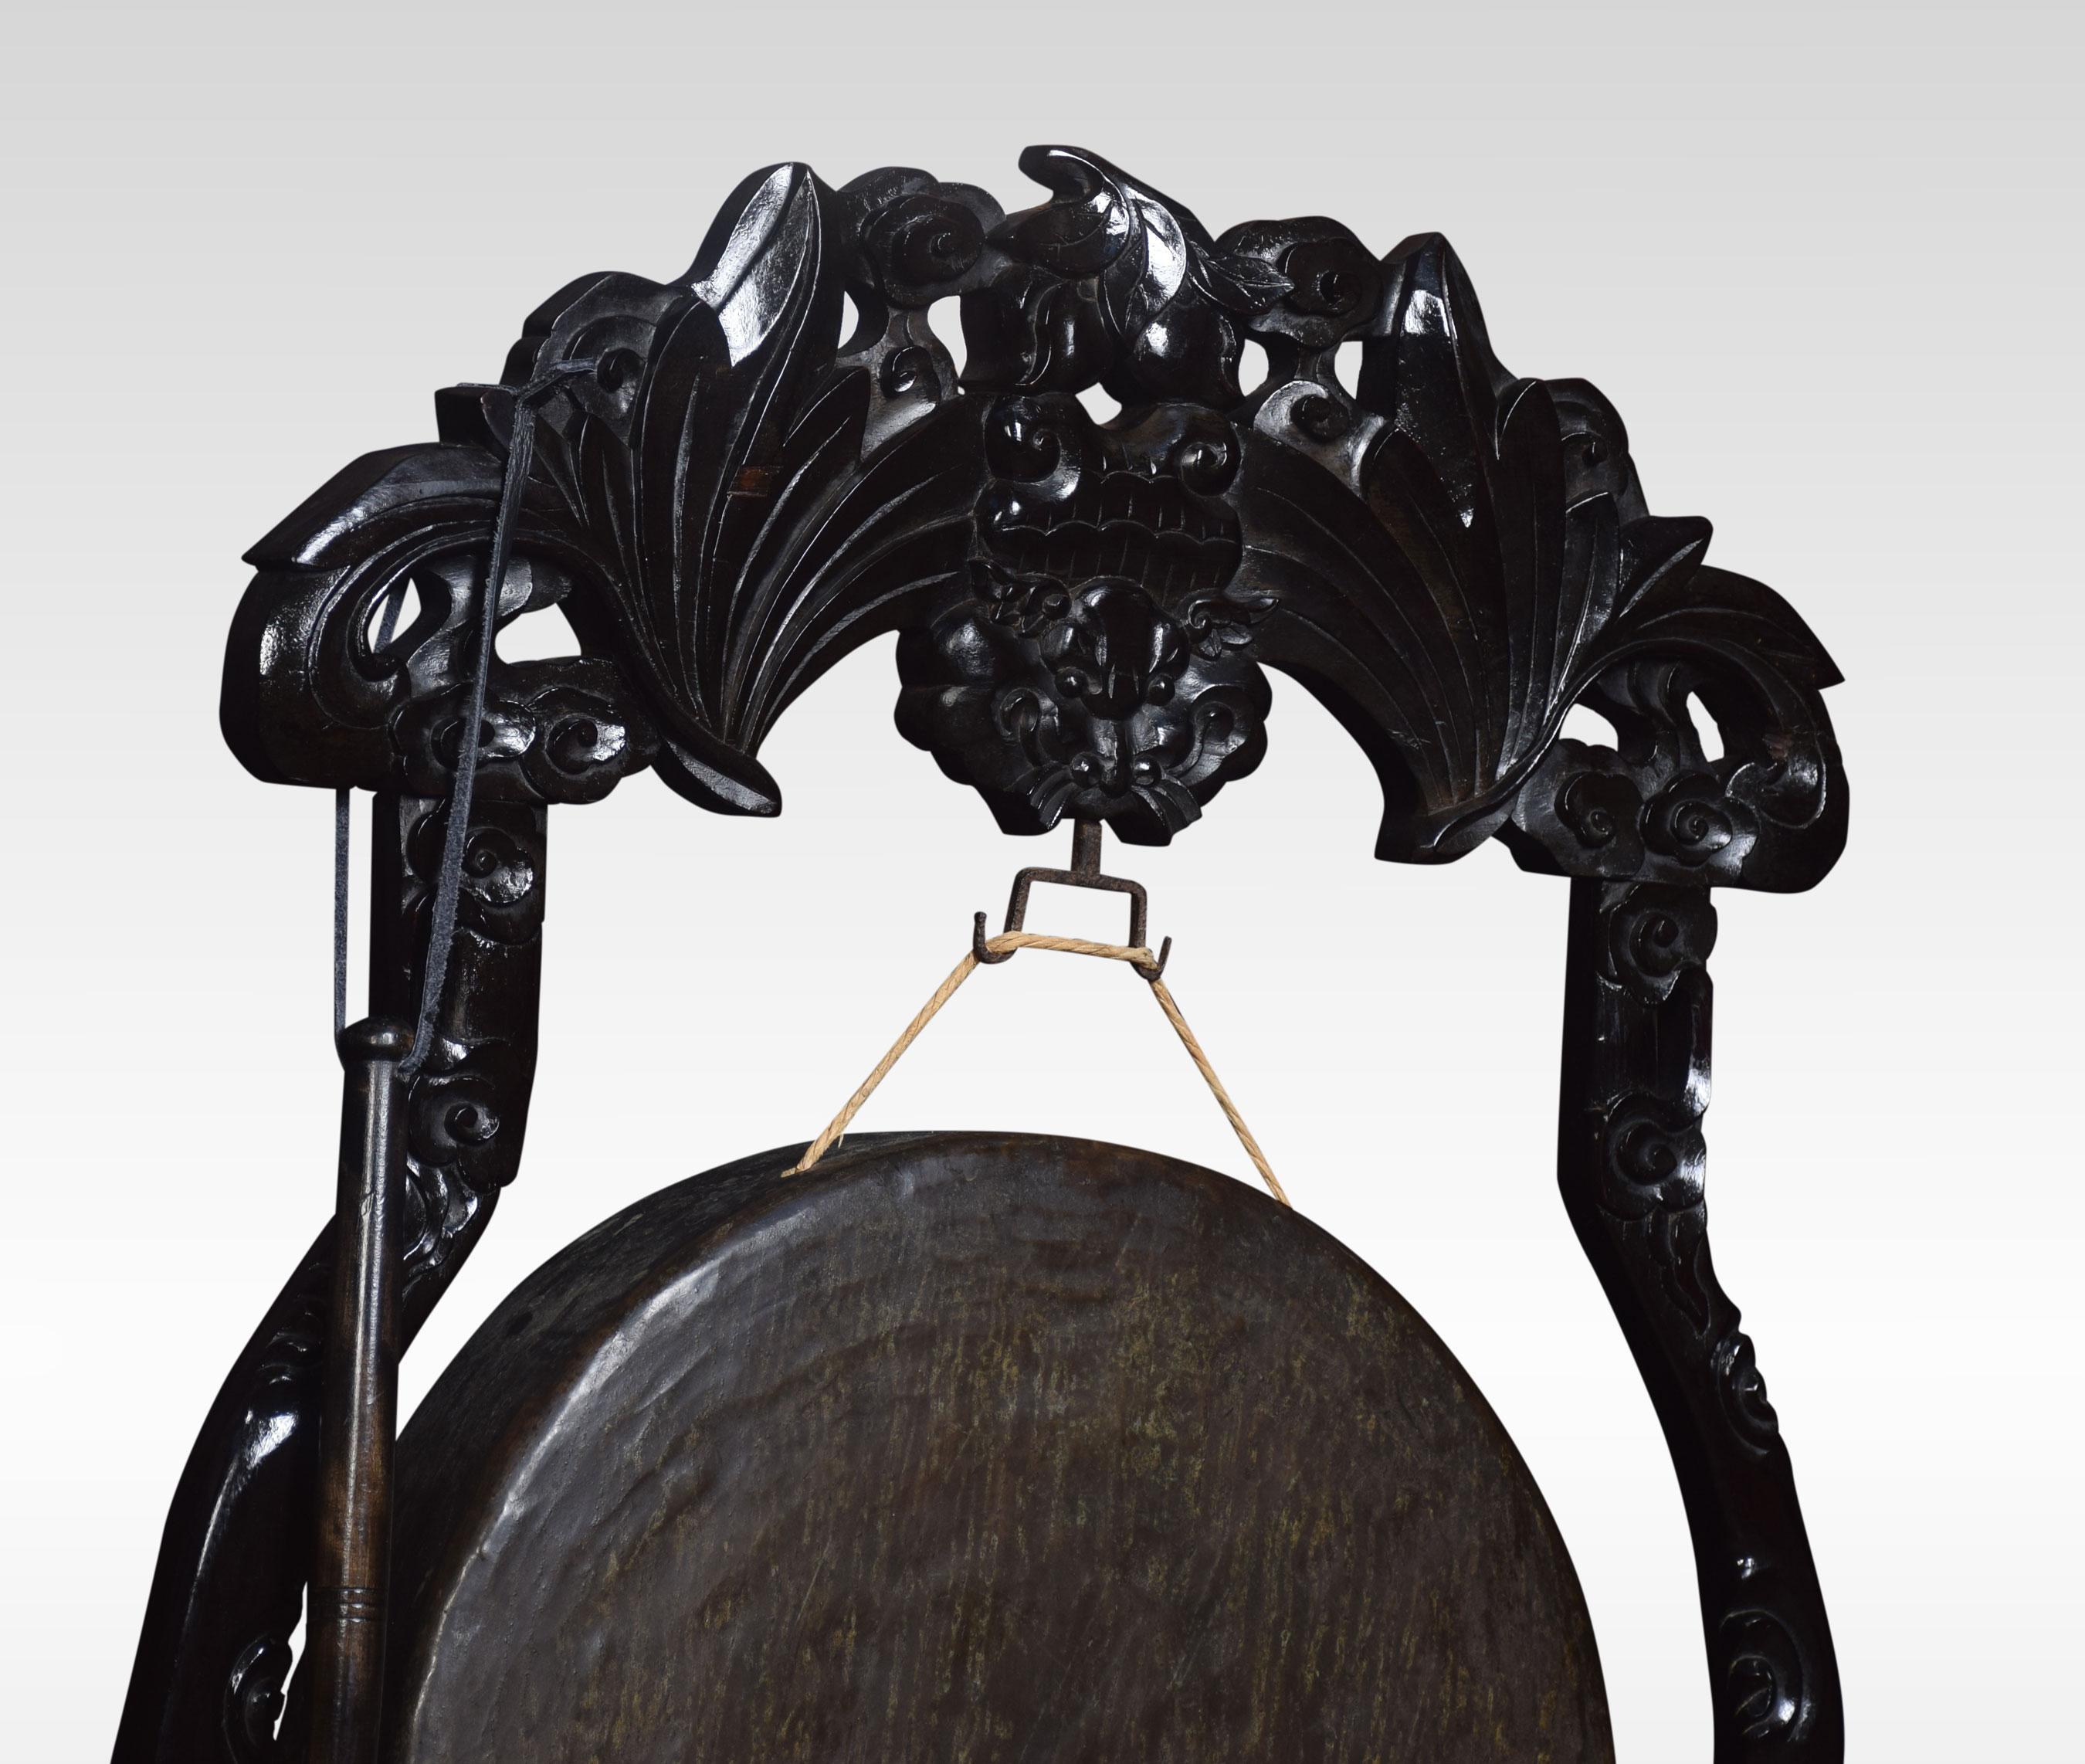 Chinese dinner gong, the profusely carved frame with pierced decoration, supporting the original brass gong and beater. All raised up on stylized block feet.
Chinese export Camphor trunk the figured hinged top opening to reveal large storage